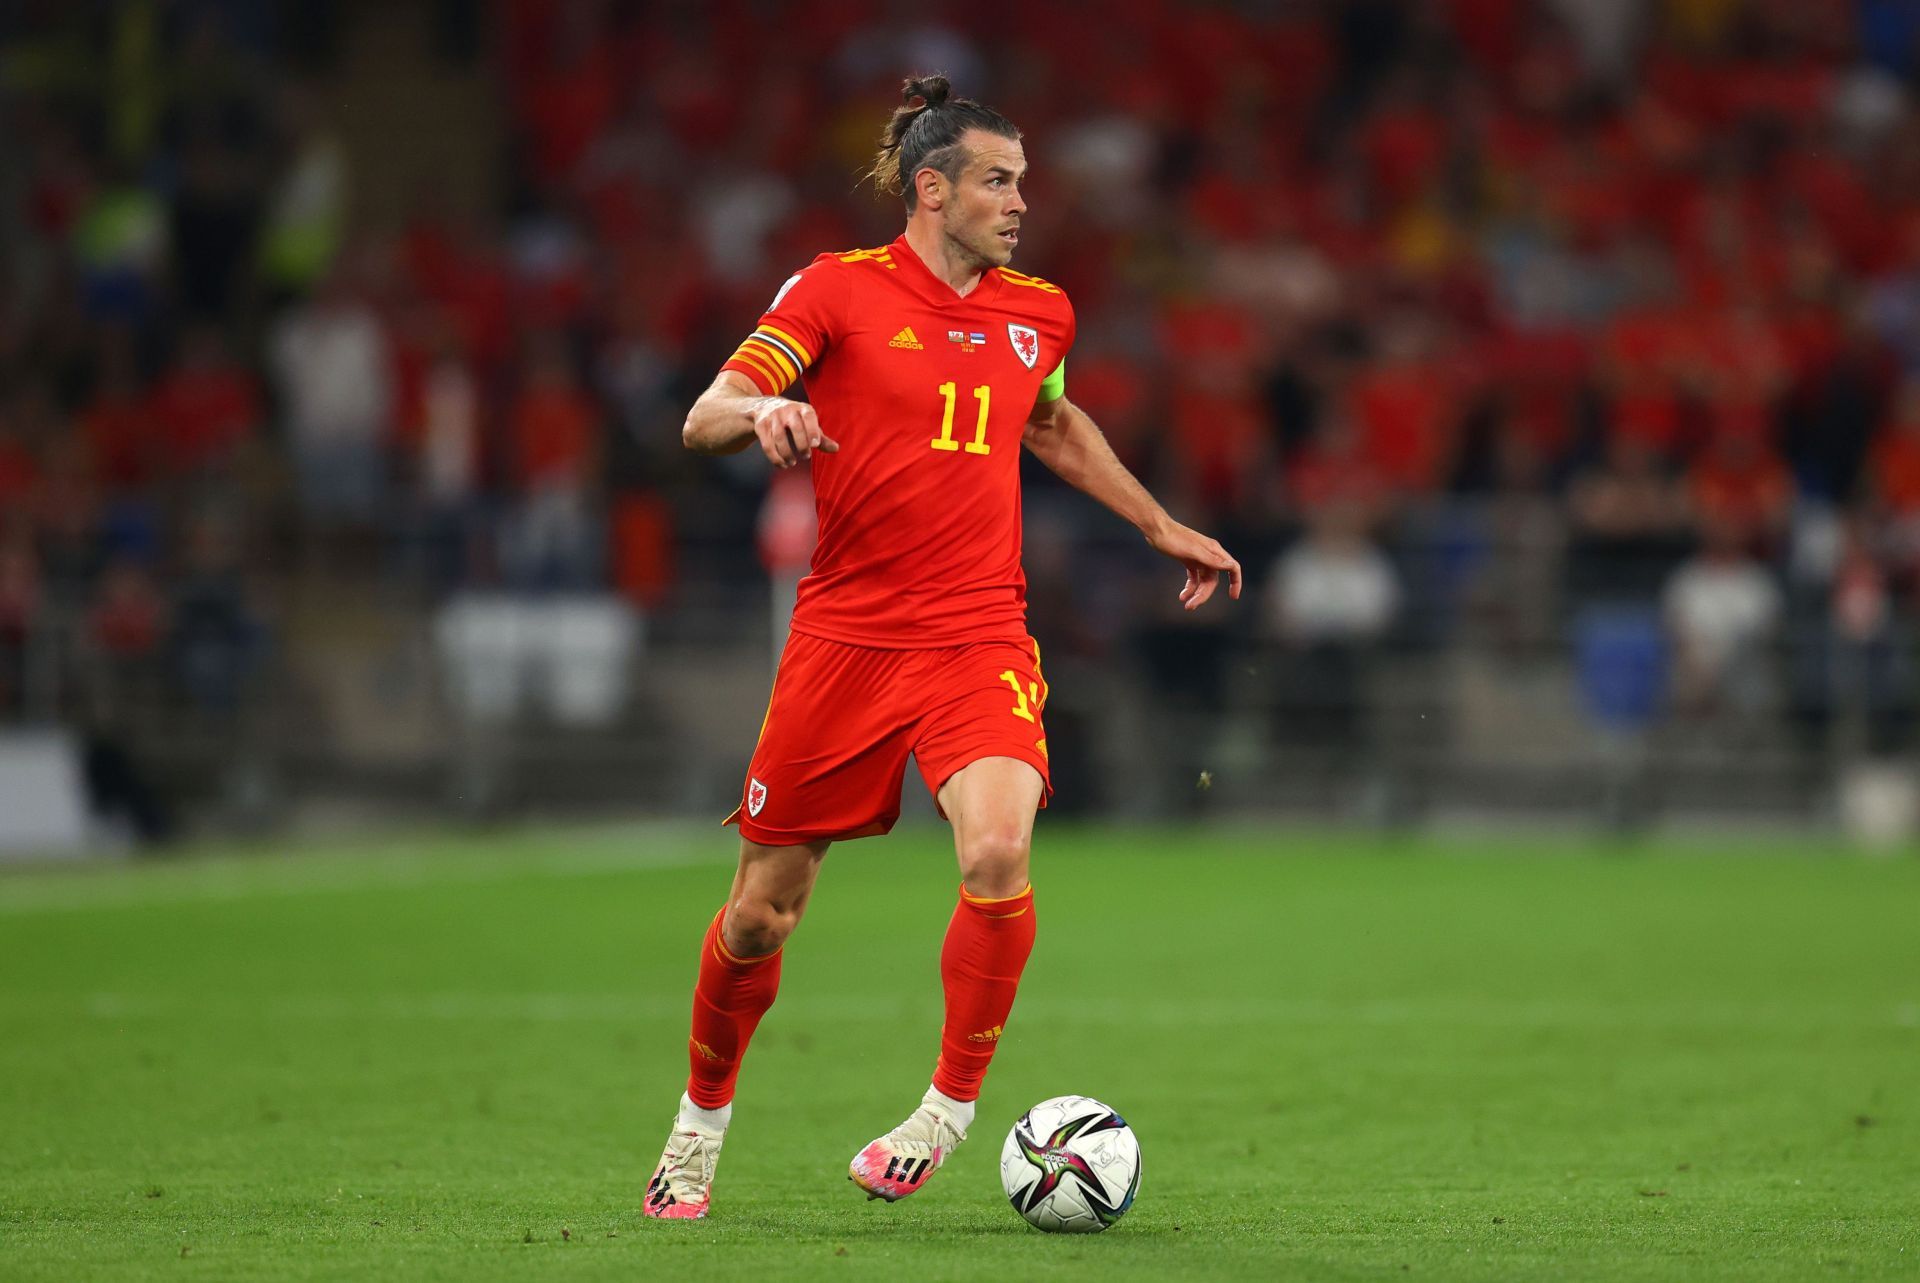 Arsenal are interested in taking Gareth Bale on loan.